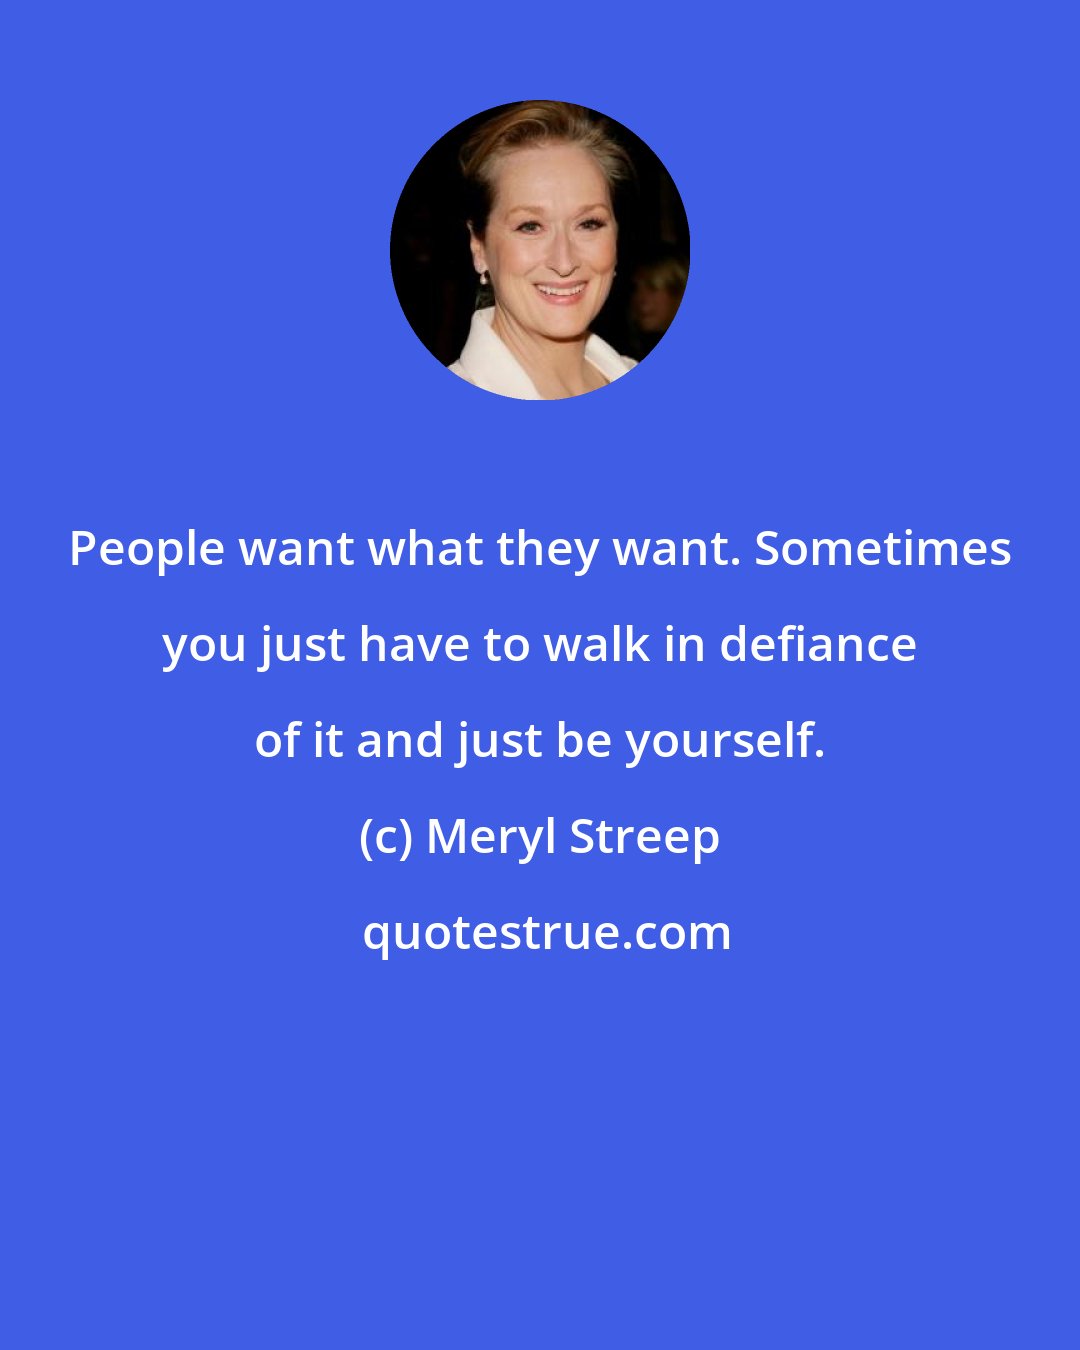 Meryl Streep: People want what they want. Sometimes you just have to walk in defiance of it and just be yourself.